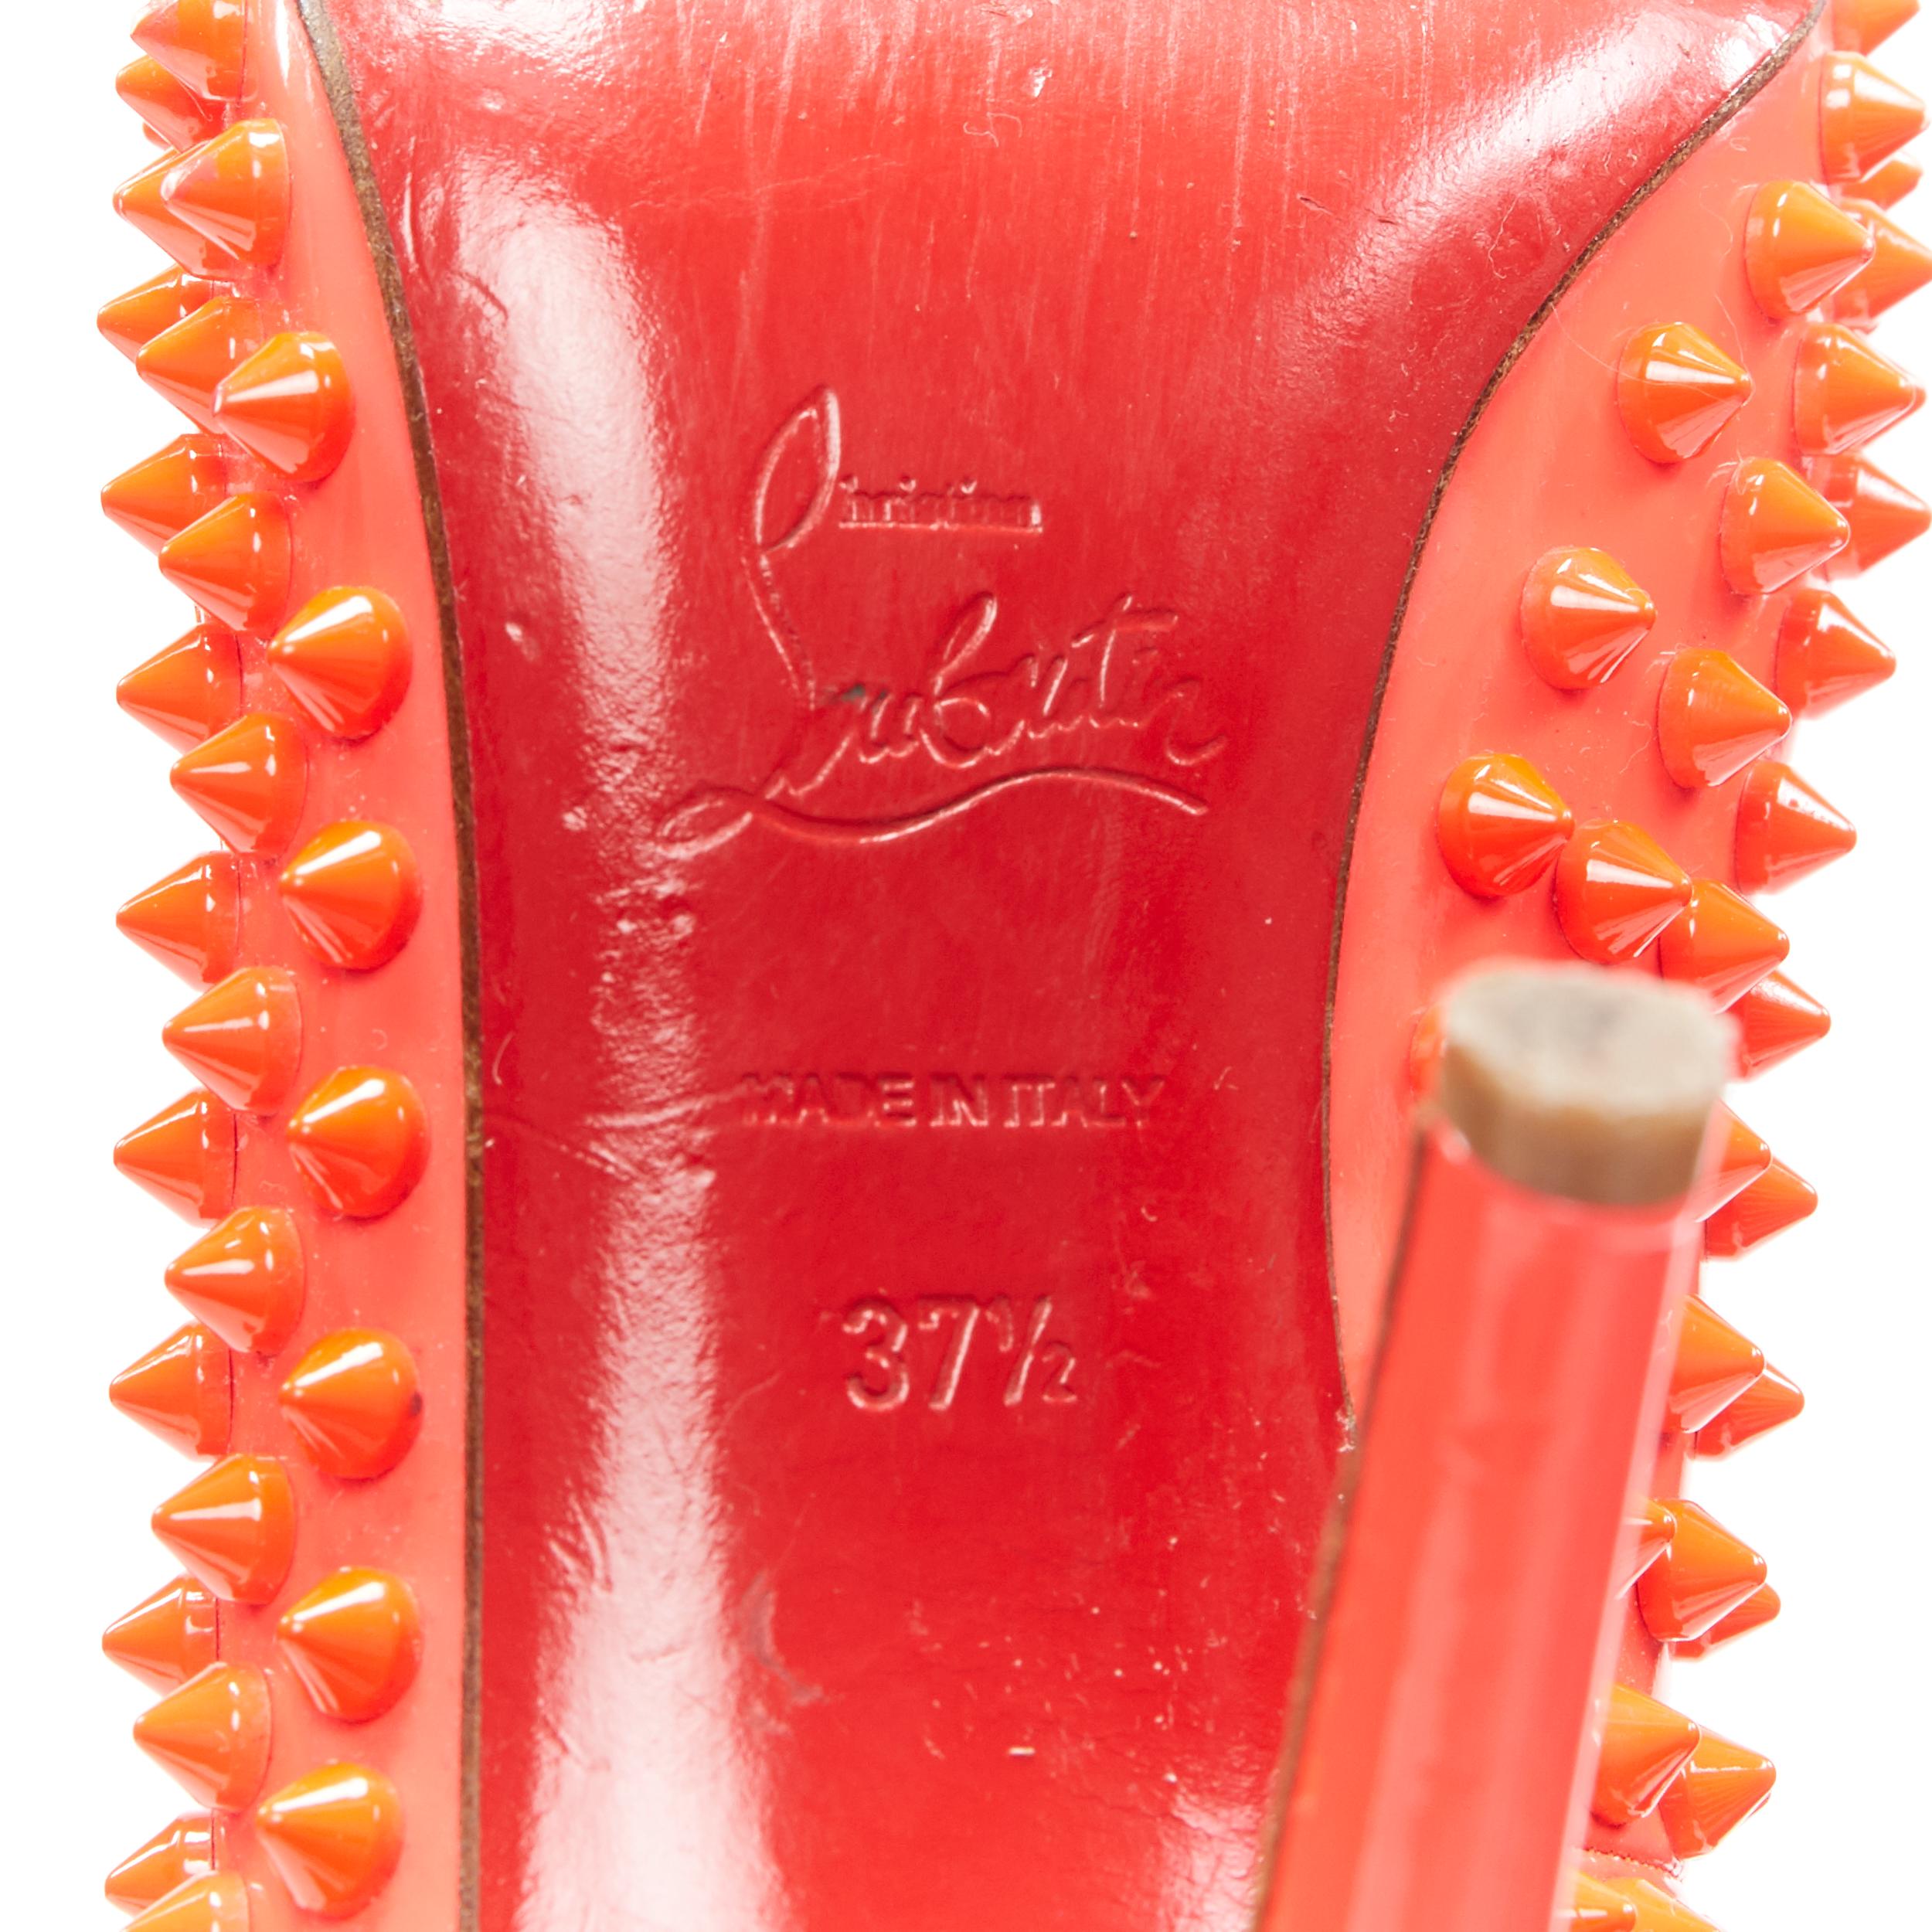 CHRISTIAN LOUBOUTIN neon pink patent spike stud point toe pigalle pump EU37.5 4